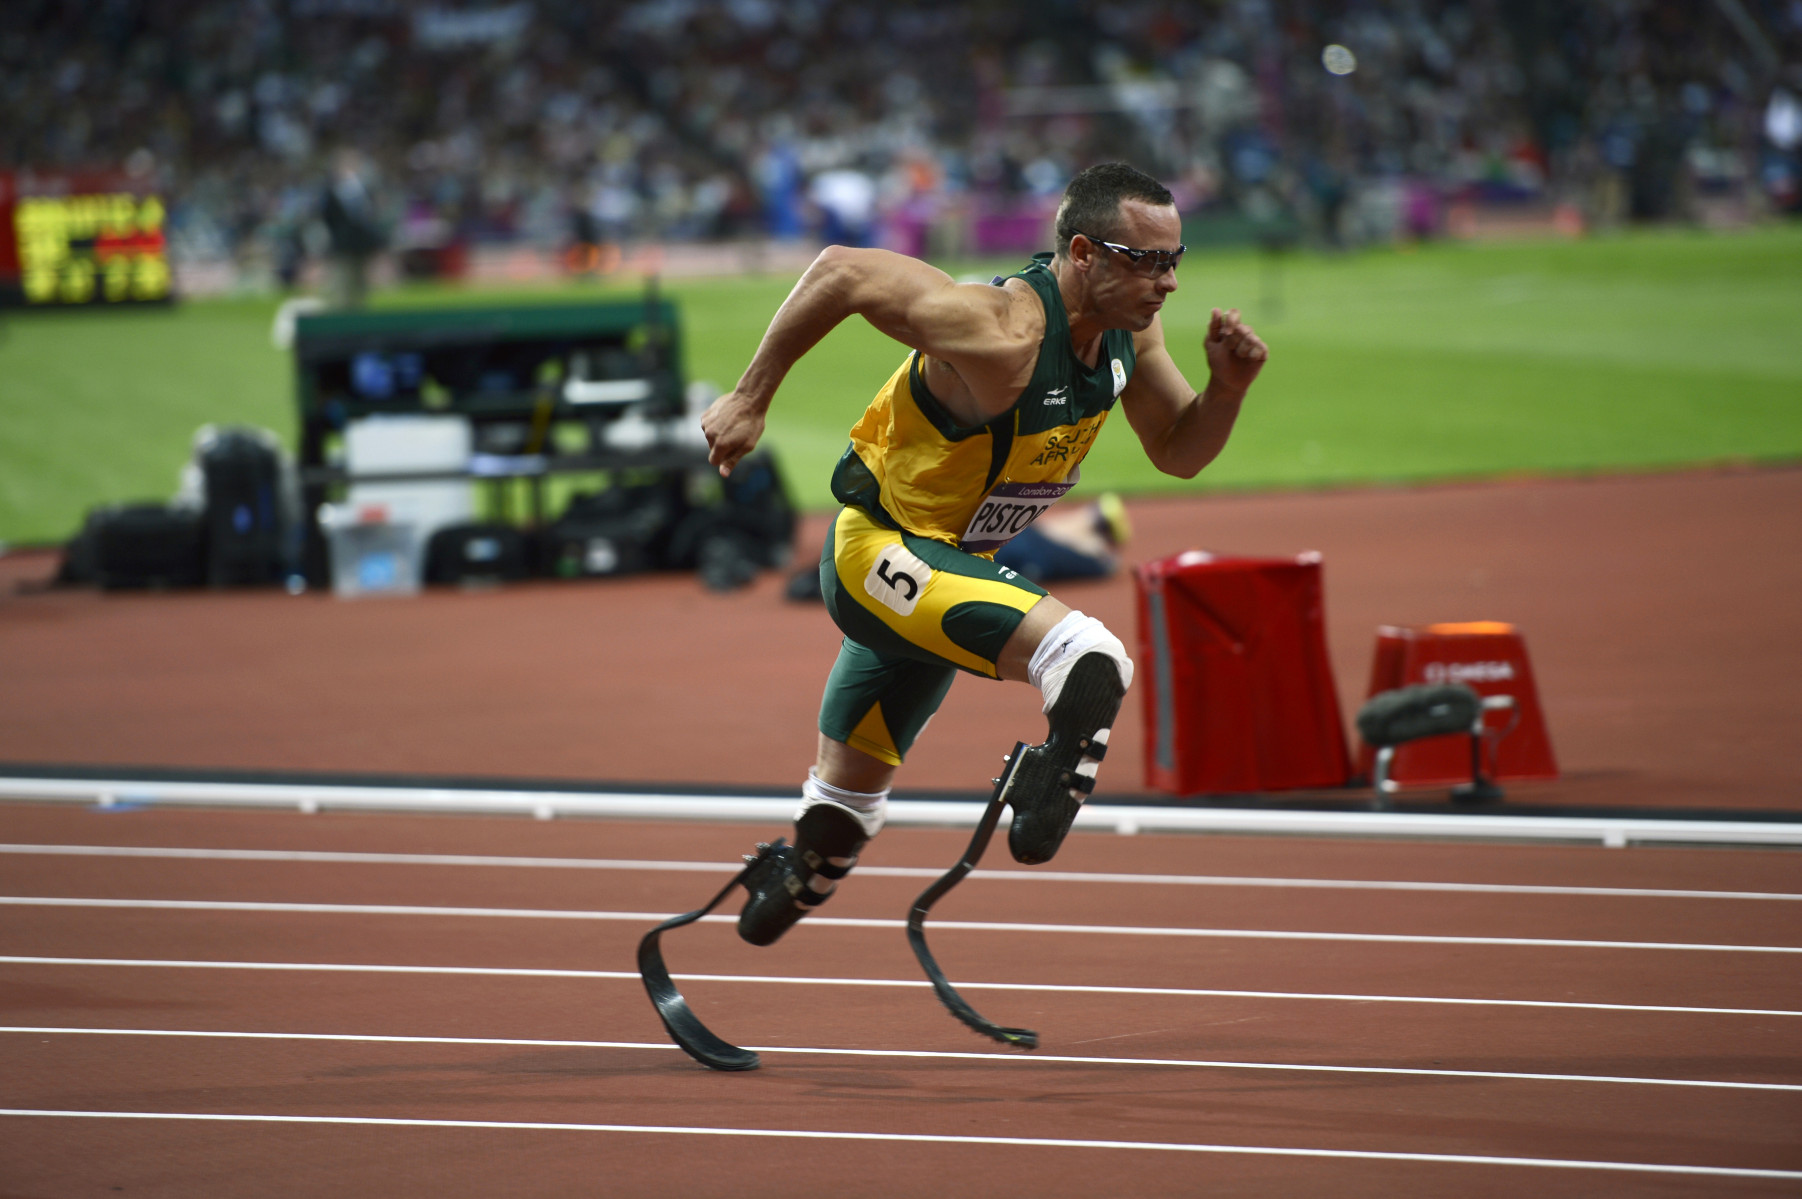 Oscar Pistorius of South Africa - Men's 400 Meter Semi-Final. : London Olympics : Photography by Adam Stoltman: Sports Photography, The Arts, Portraiture, Travel, Photojournalism and Fine Art in New York